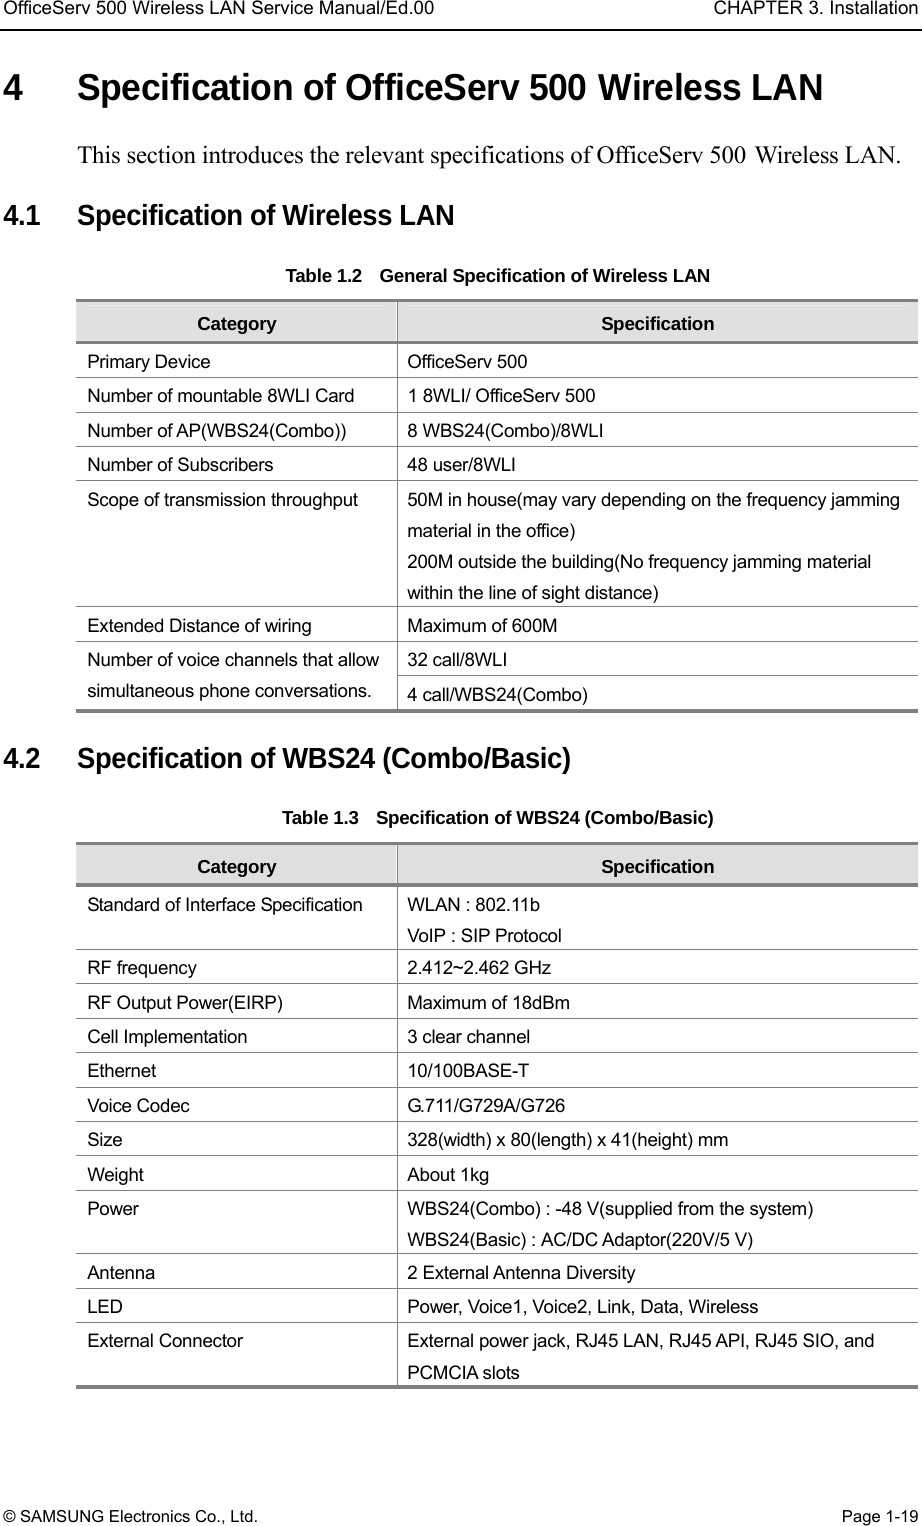 OfficeServ 500 Wireless LAN Service Manual/Ed.00  CHAPTER 3. Installation © SAMSUNG Electronics Co., Ltd.  Page 1-19 4  Specification of OfficeServ 500 Wireless LAN This section introduces the relevant specifications of OfficeServ 500 Wireless LAN.  4.1  Specification of Wireless LAN Table 1.2  General Specification of Wireless LAN Category  Specification Primary Device  OfficeServ 500 Number of mountable 8WLI Card  1 8WLI/ OfficeServ 500 Number of AP(WBS24(Combo))    8 WBS24(Combo)/8WLI Number of Subscribers  48 user/8WLI Scope of transmission throughput  50M in house(may vary depending on the frequency jamming material in the office) 200M outside the building(No frequency jamming material within the line of sight distance)   Extended Distance of wiring    Maximum of 600M   32 call/8WLI Number of voice channels that allow simultaneous phone conversations.  4 call/WBS24(Combo)  4.2  Specification of WBS24 (Combo/Basic)     Table 1.3  Specification of WBS24 (Combo/Basic) Category  Specification Standard of Interface Specification    WLAN : 802.11b VoIP : SIP Protocol RF frequency  2.412~2.462 GHz RF Output Power(EIRP)  Maximum of 18dBm Cell Implementation  3 clear channel   Ethernet 10/100BASE-T Voice Codec  G.711/G729A/G726 Size  328(width) x 80(length) x 41(height) mm Weight About 1kg Power    WBS24(Combo) : -48 V(supplied from the system) WBS24(Basic) : AC/DC Adaptor(220V/5 V) Antenna  2 External Antenna Diversity LED  Power, Voice1, Voice2, Link, Data, Wireless External Connector  External power jack, RJ45 LAN, RJ45 API, RJ45 SIO, and PCMCIA slots  